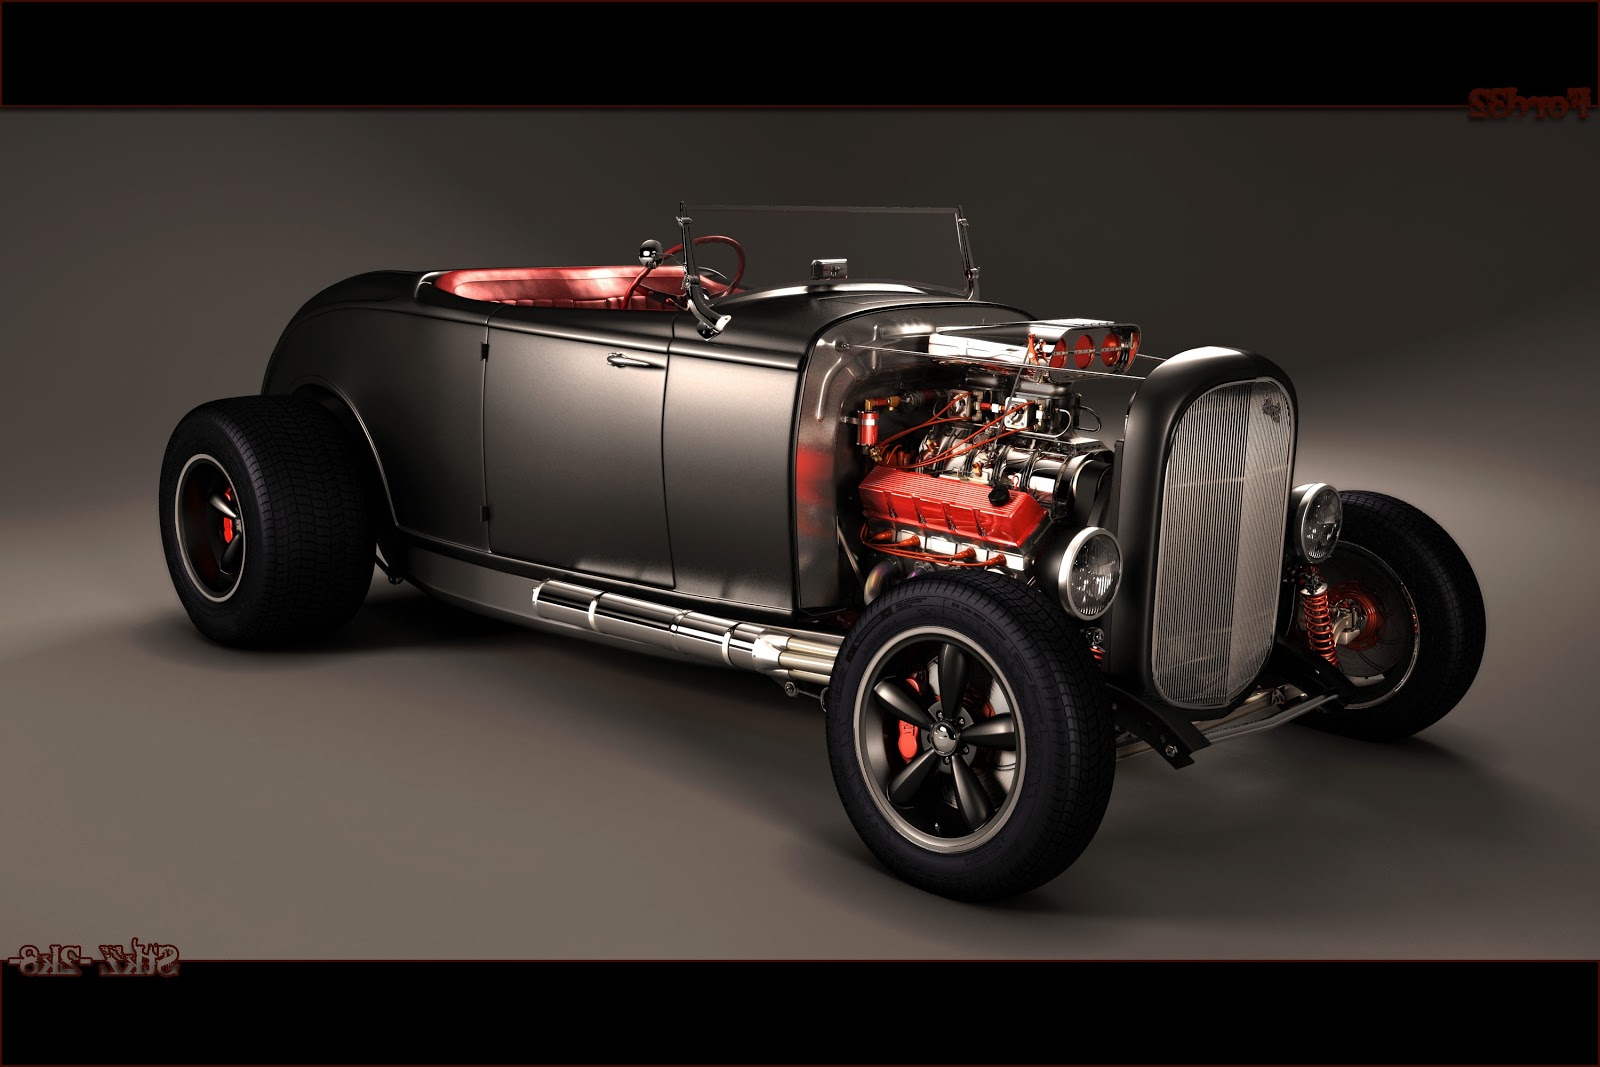 Tattoo Wallpaper Hot Rod Car Pictures